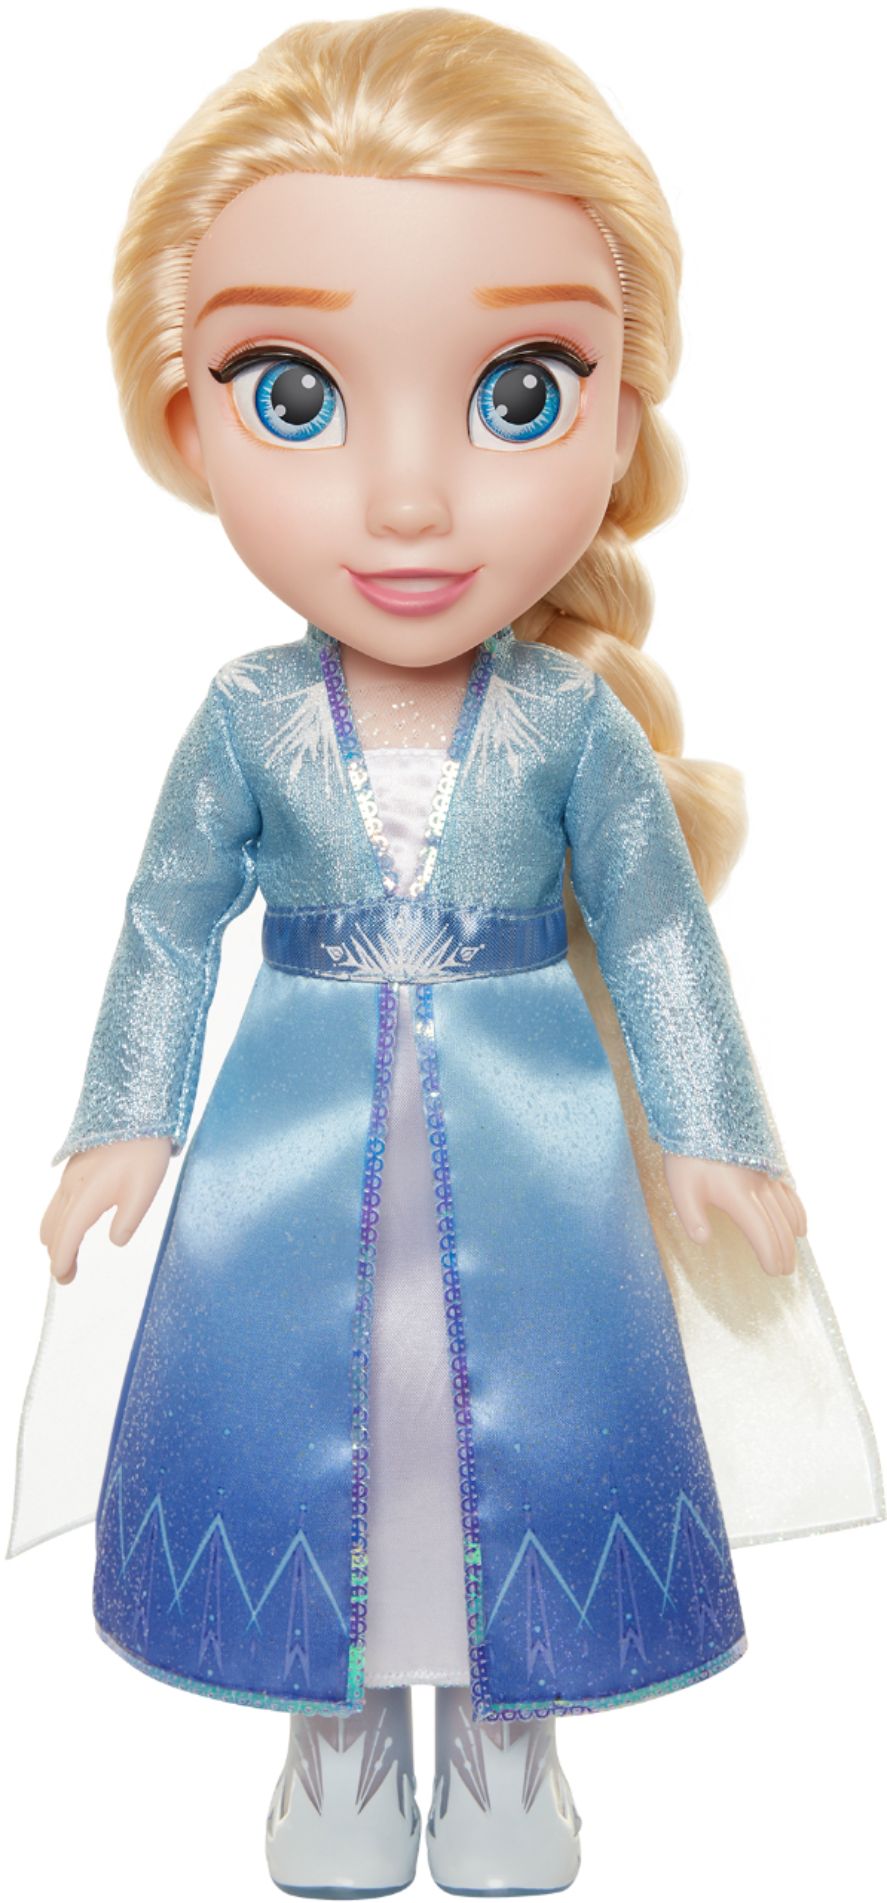 Disney Store Official Princess Elsa Classic Doll for Kids, Frozen 2, 11½  Inches, Includes Golden Brush with Molded Details, Fully Posable Toy Figure